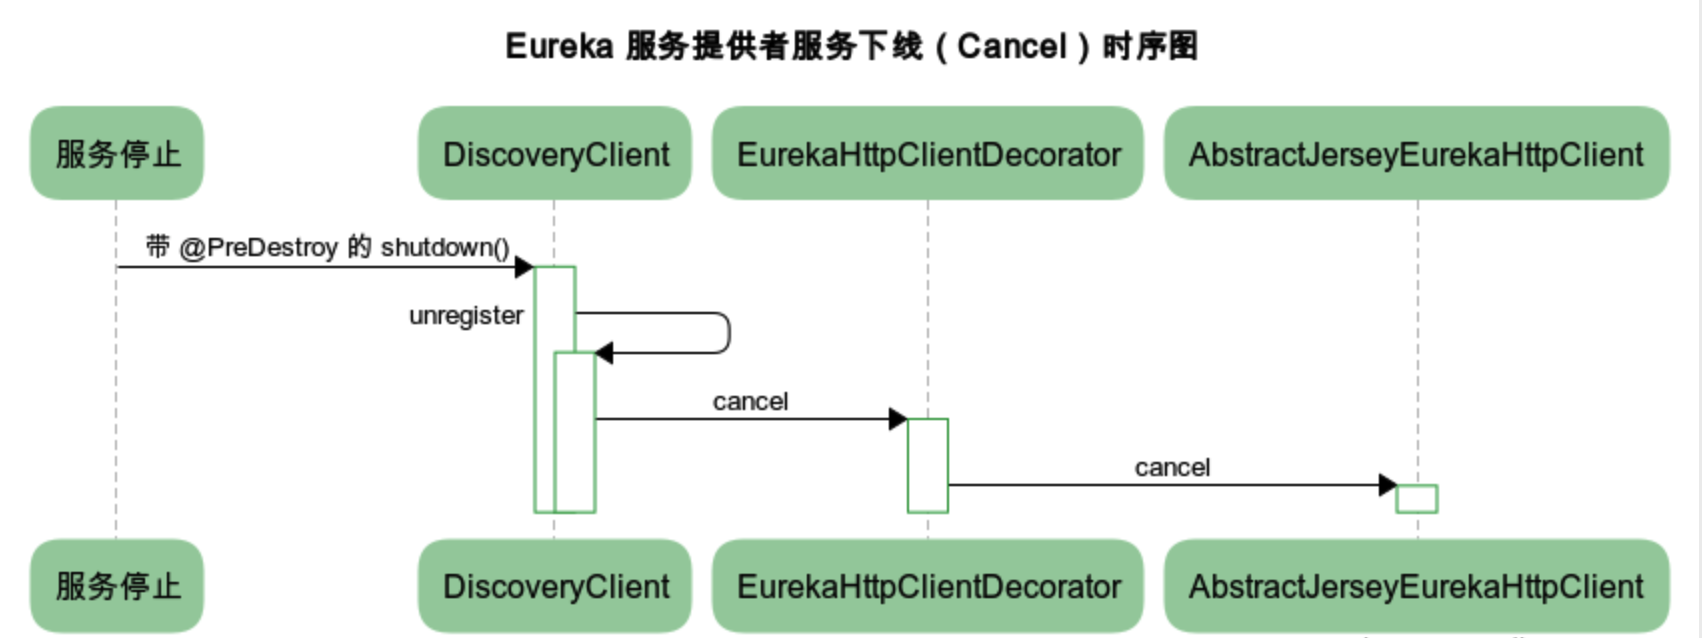 docs/micro-services/images/eureka-service-provider-cancel-sequence-chart.png